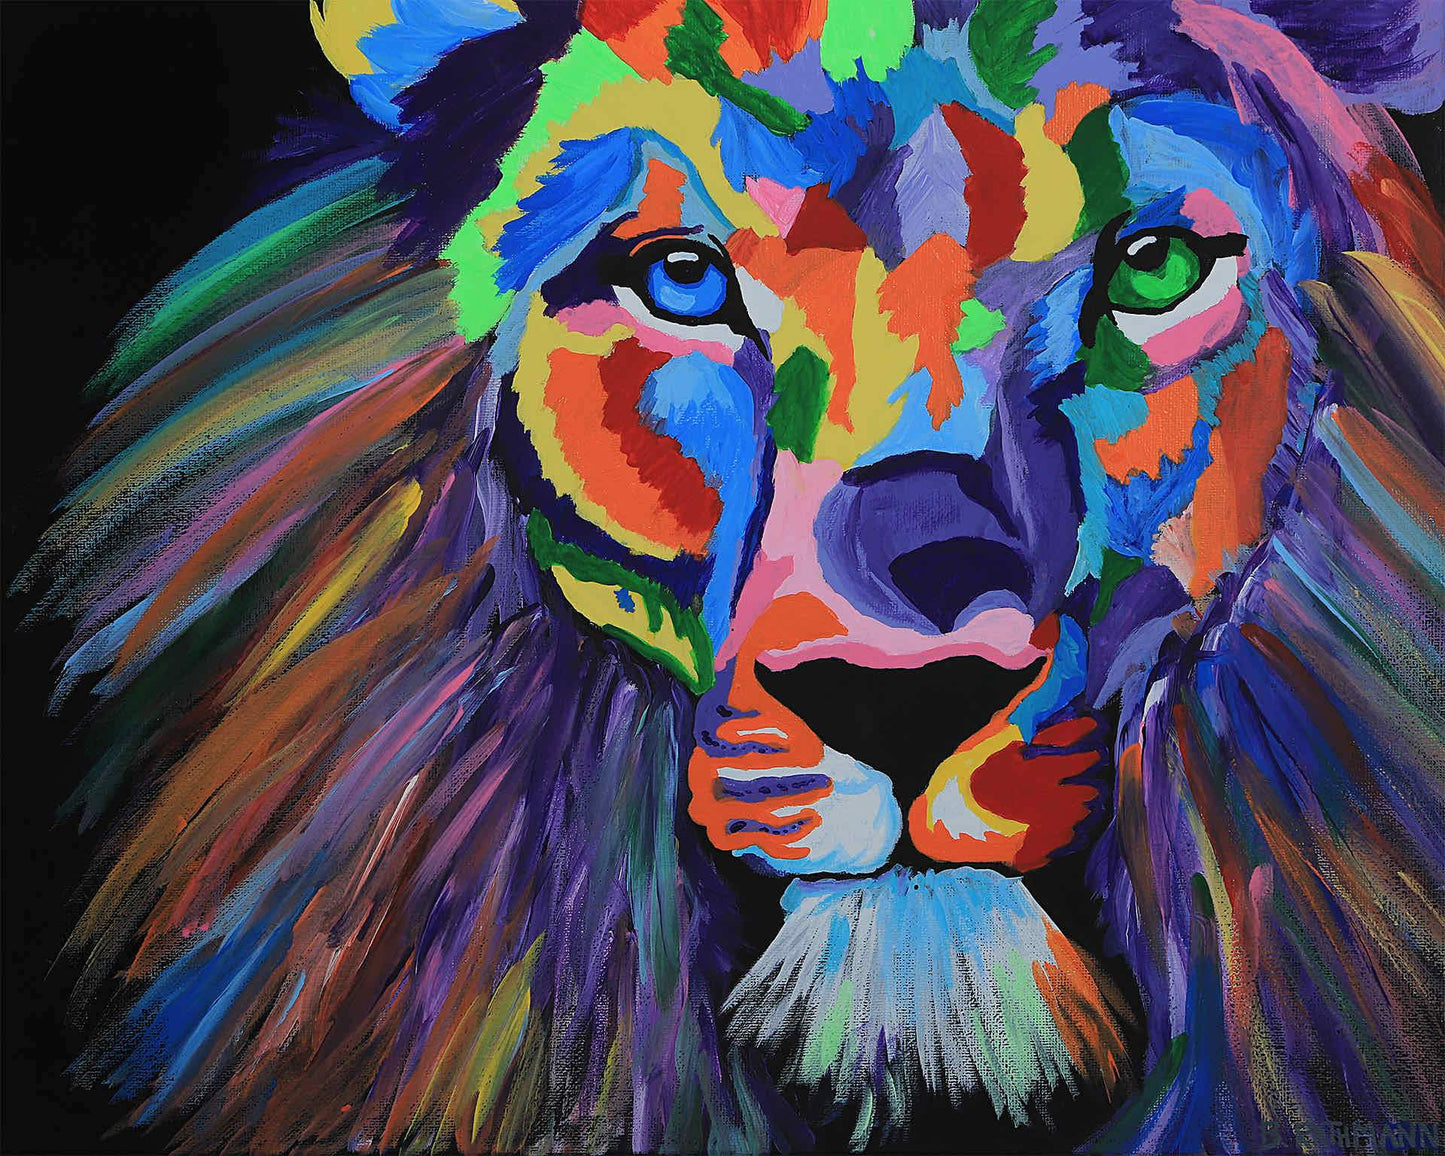 My Reflection is an abstract colorful lion wall art print.